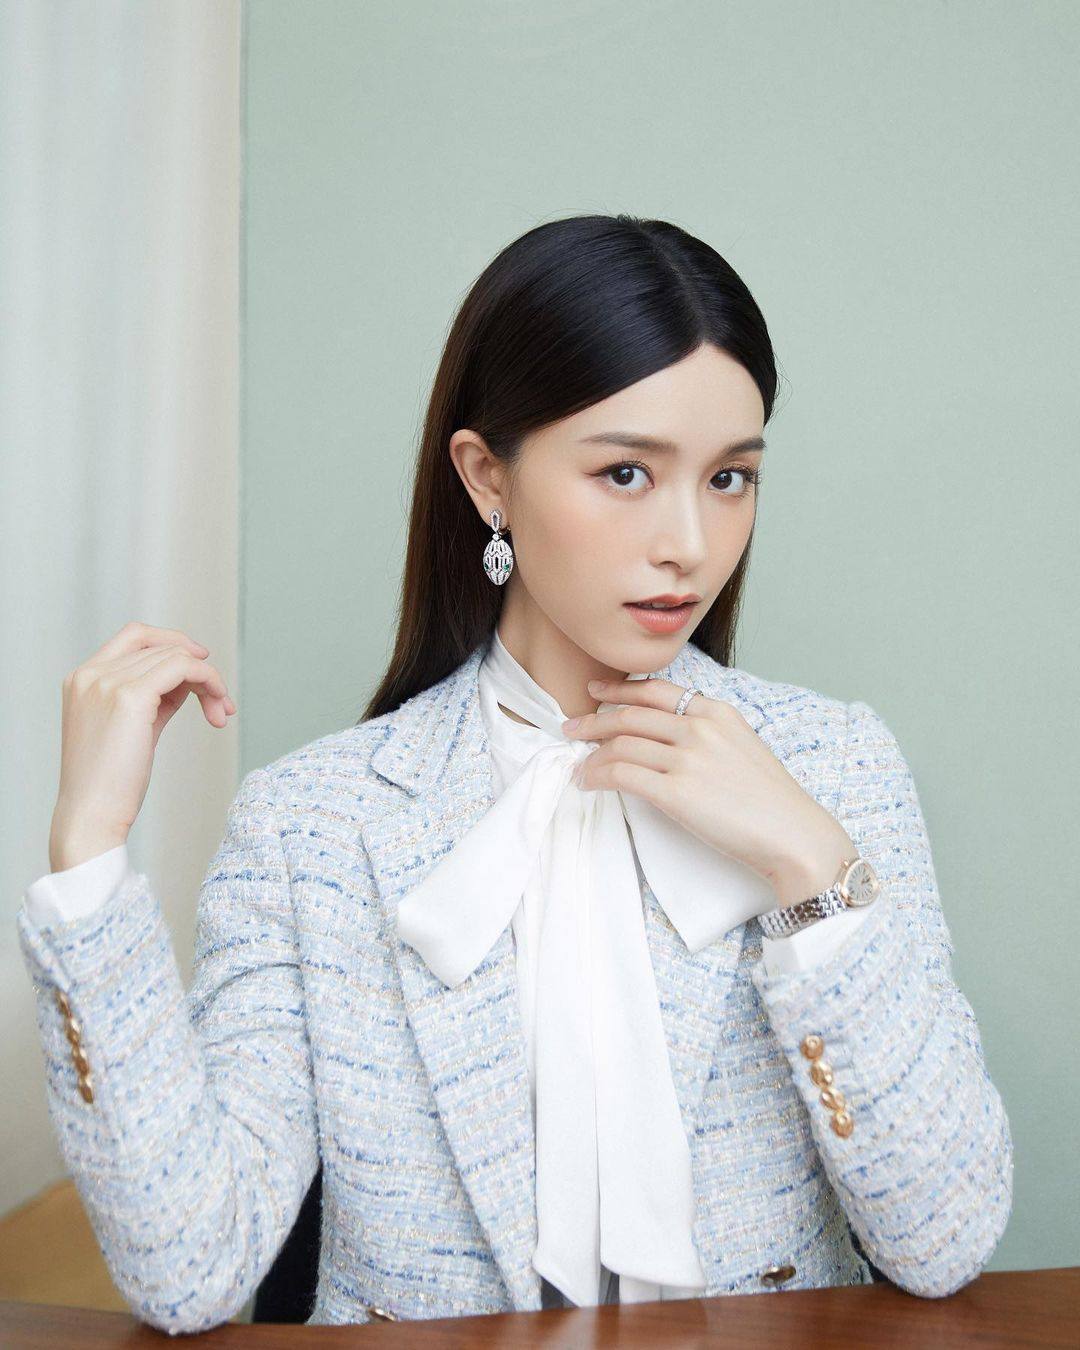 Hong Kong actress Janice Man went from model to Chinese acting superstar – and has the luxury lifestyle to prove it. Photo: @janice_man/Instagram